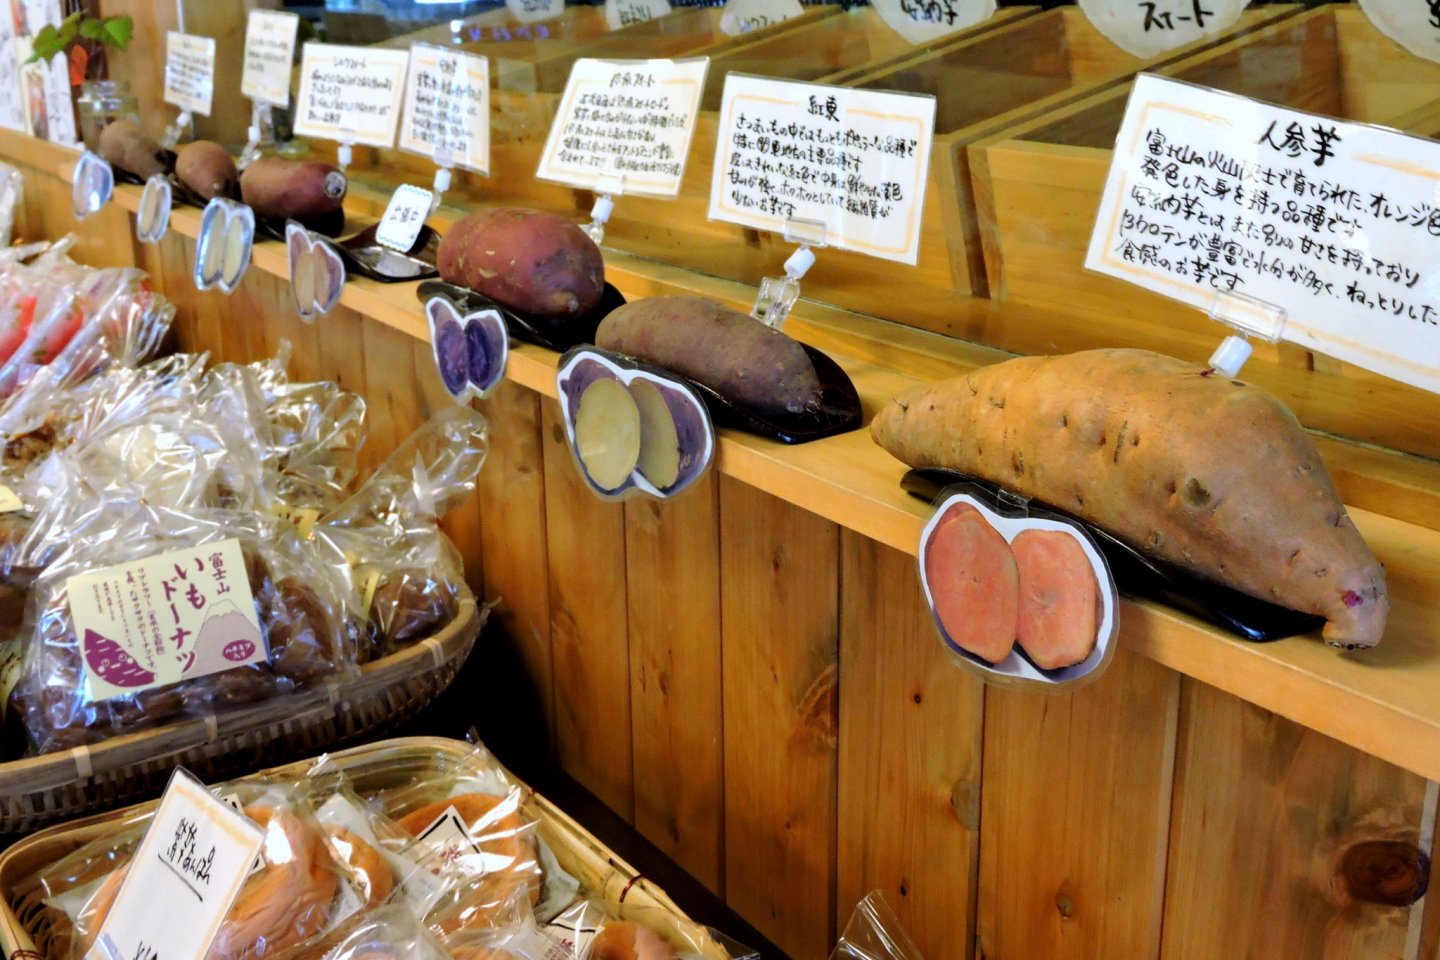 Different kinds of sweet potatoes